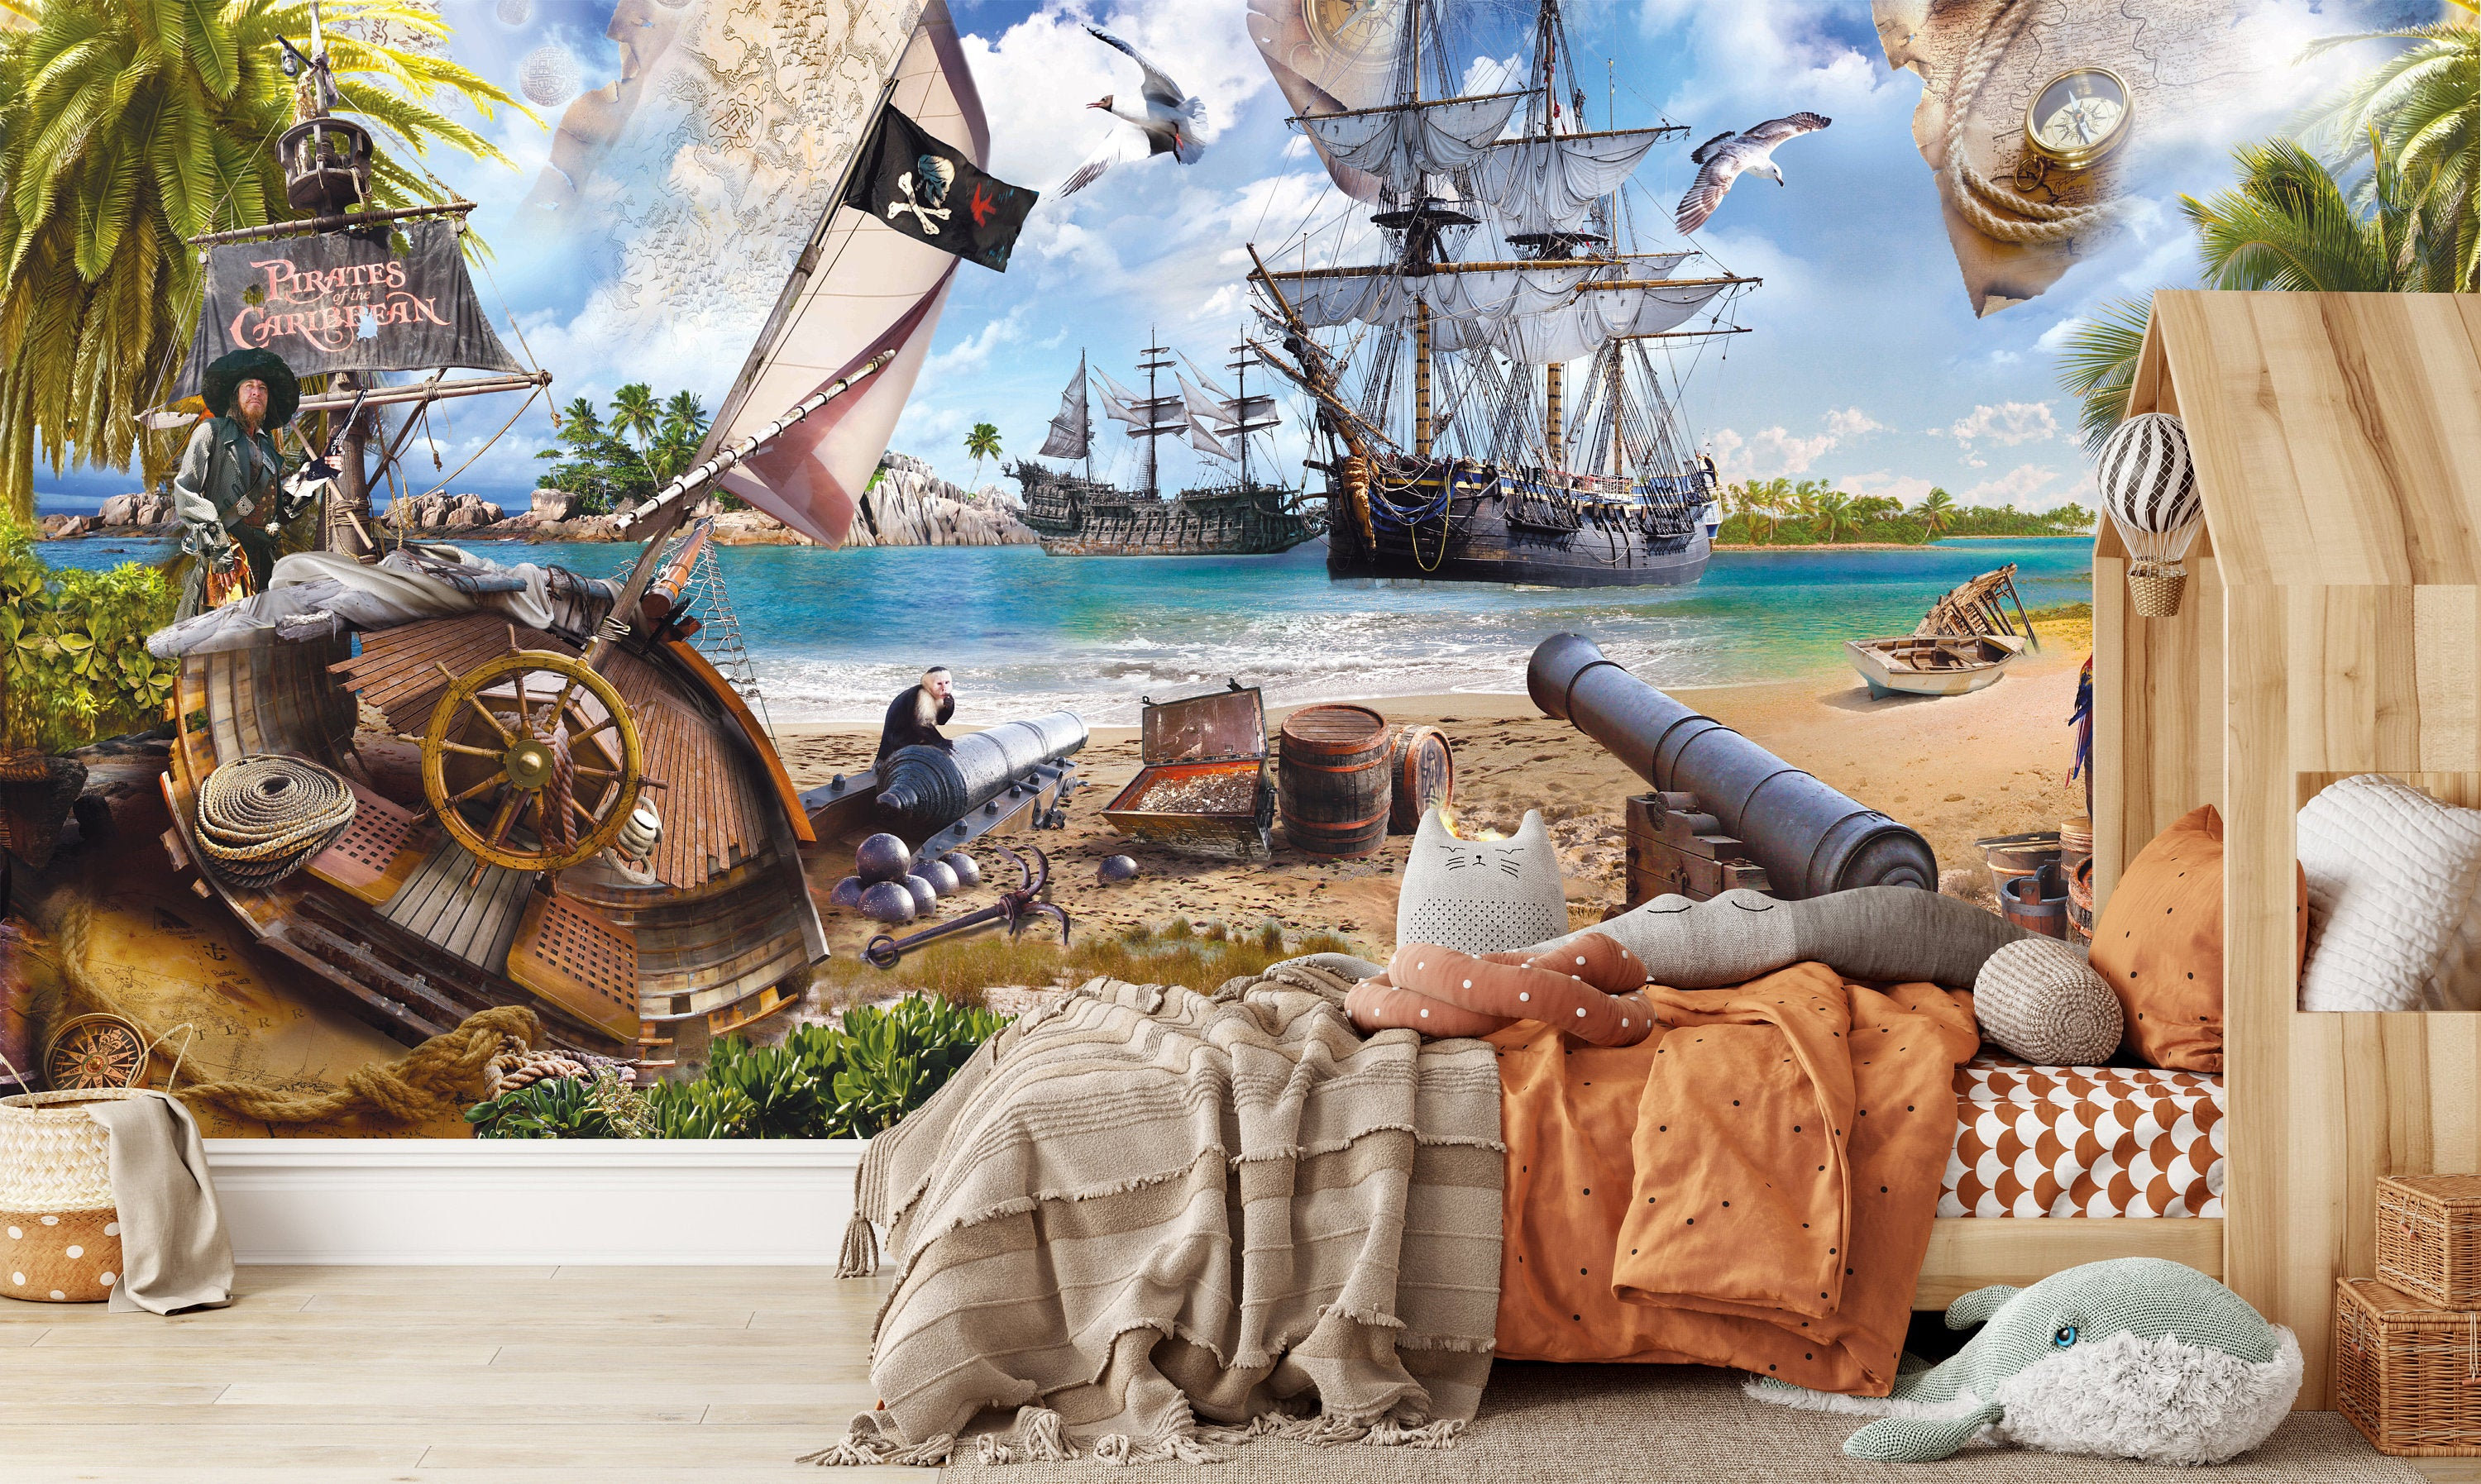 Pirate Ship Backgrounds - Wallpaper Cave